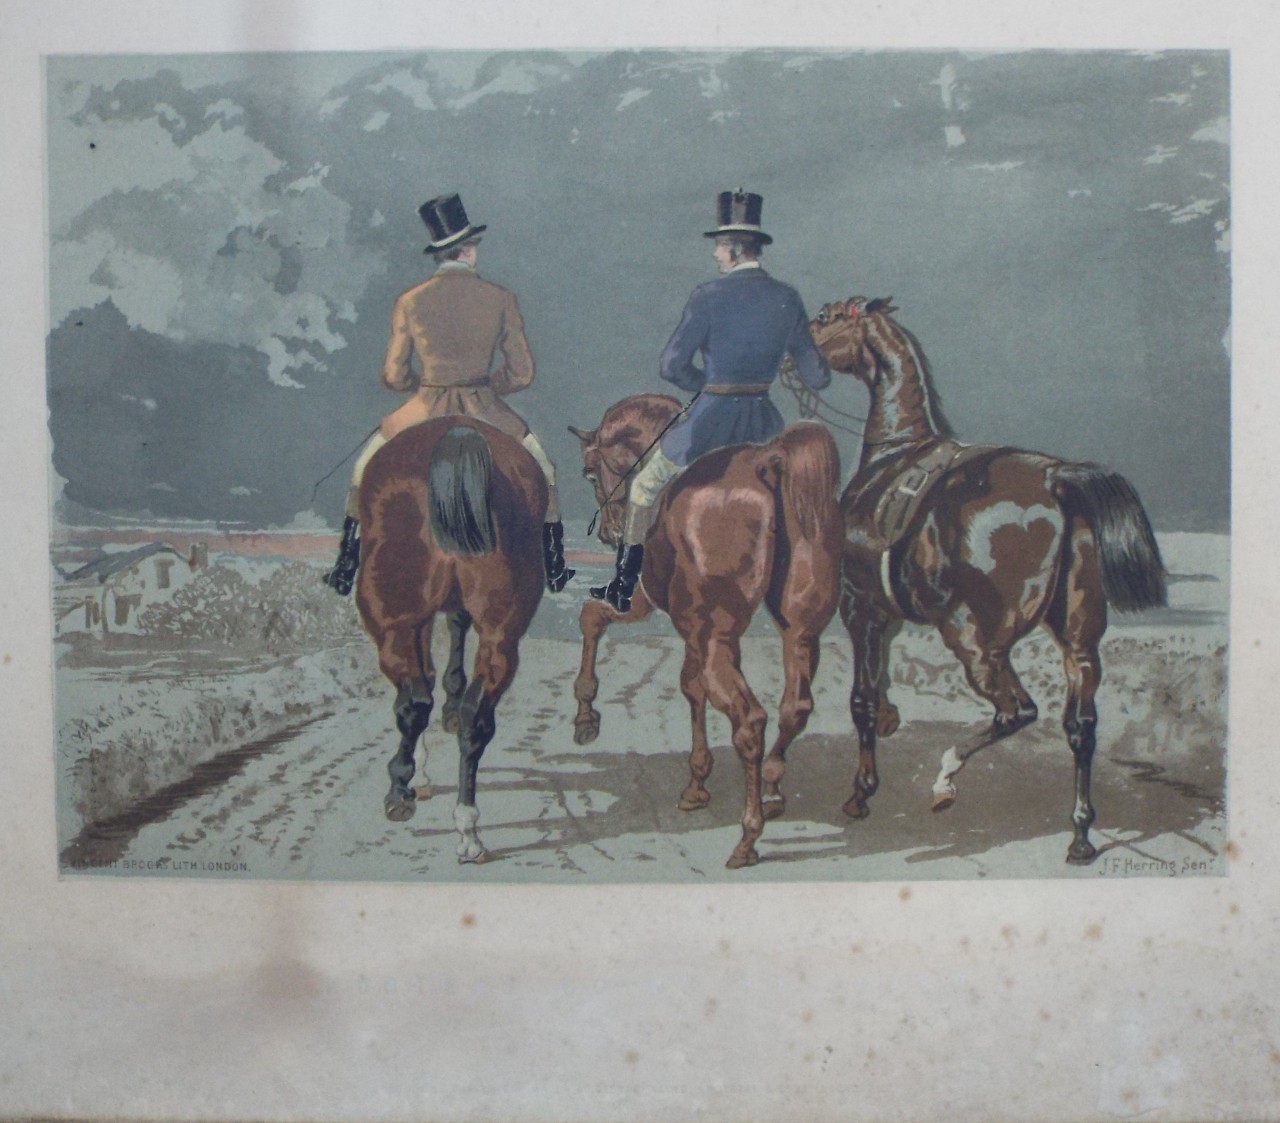 Chromo-lithograph - Herring's Sporting Sketches. Hunters Going to Cover.